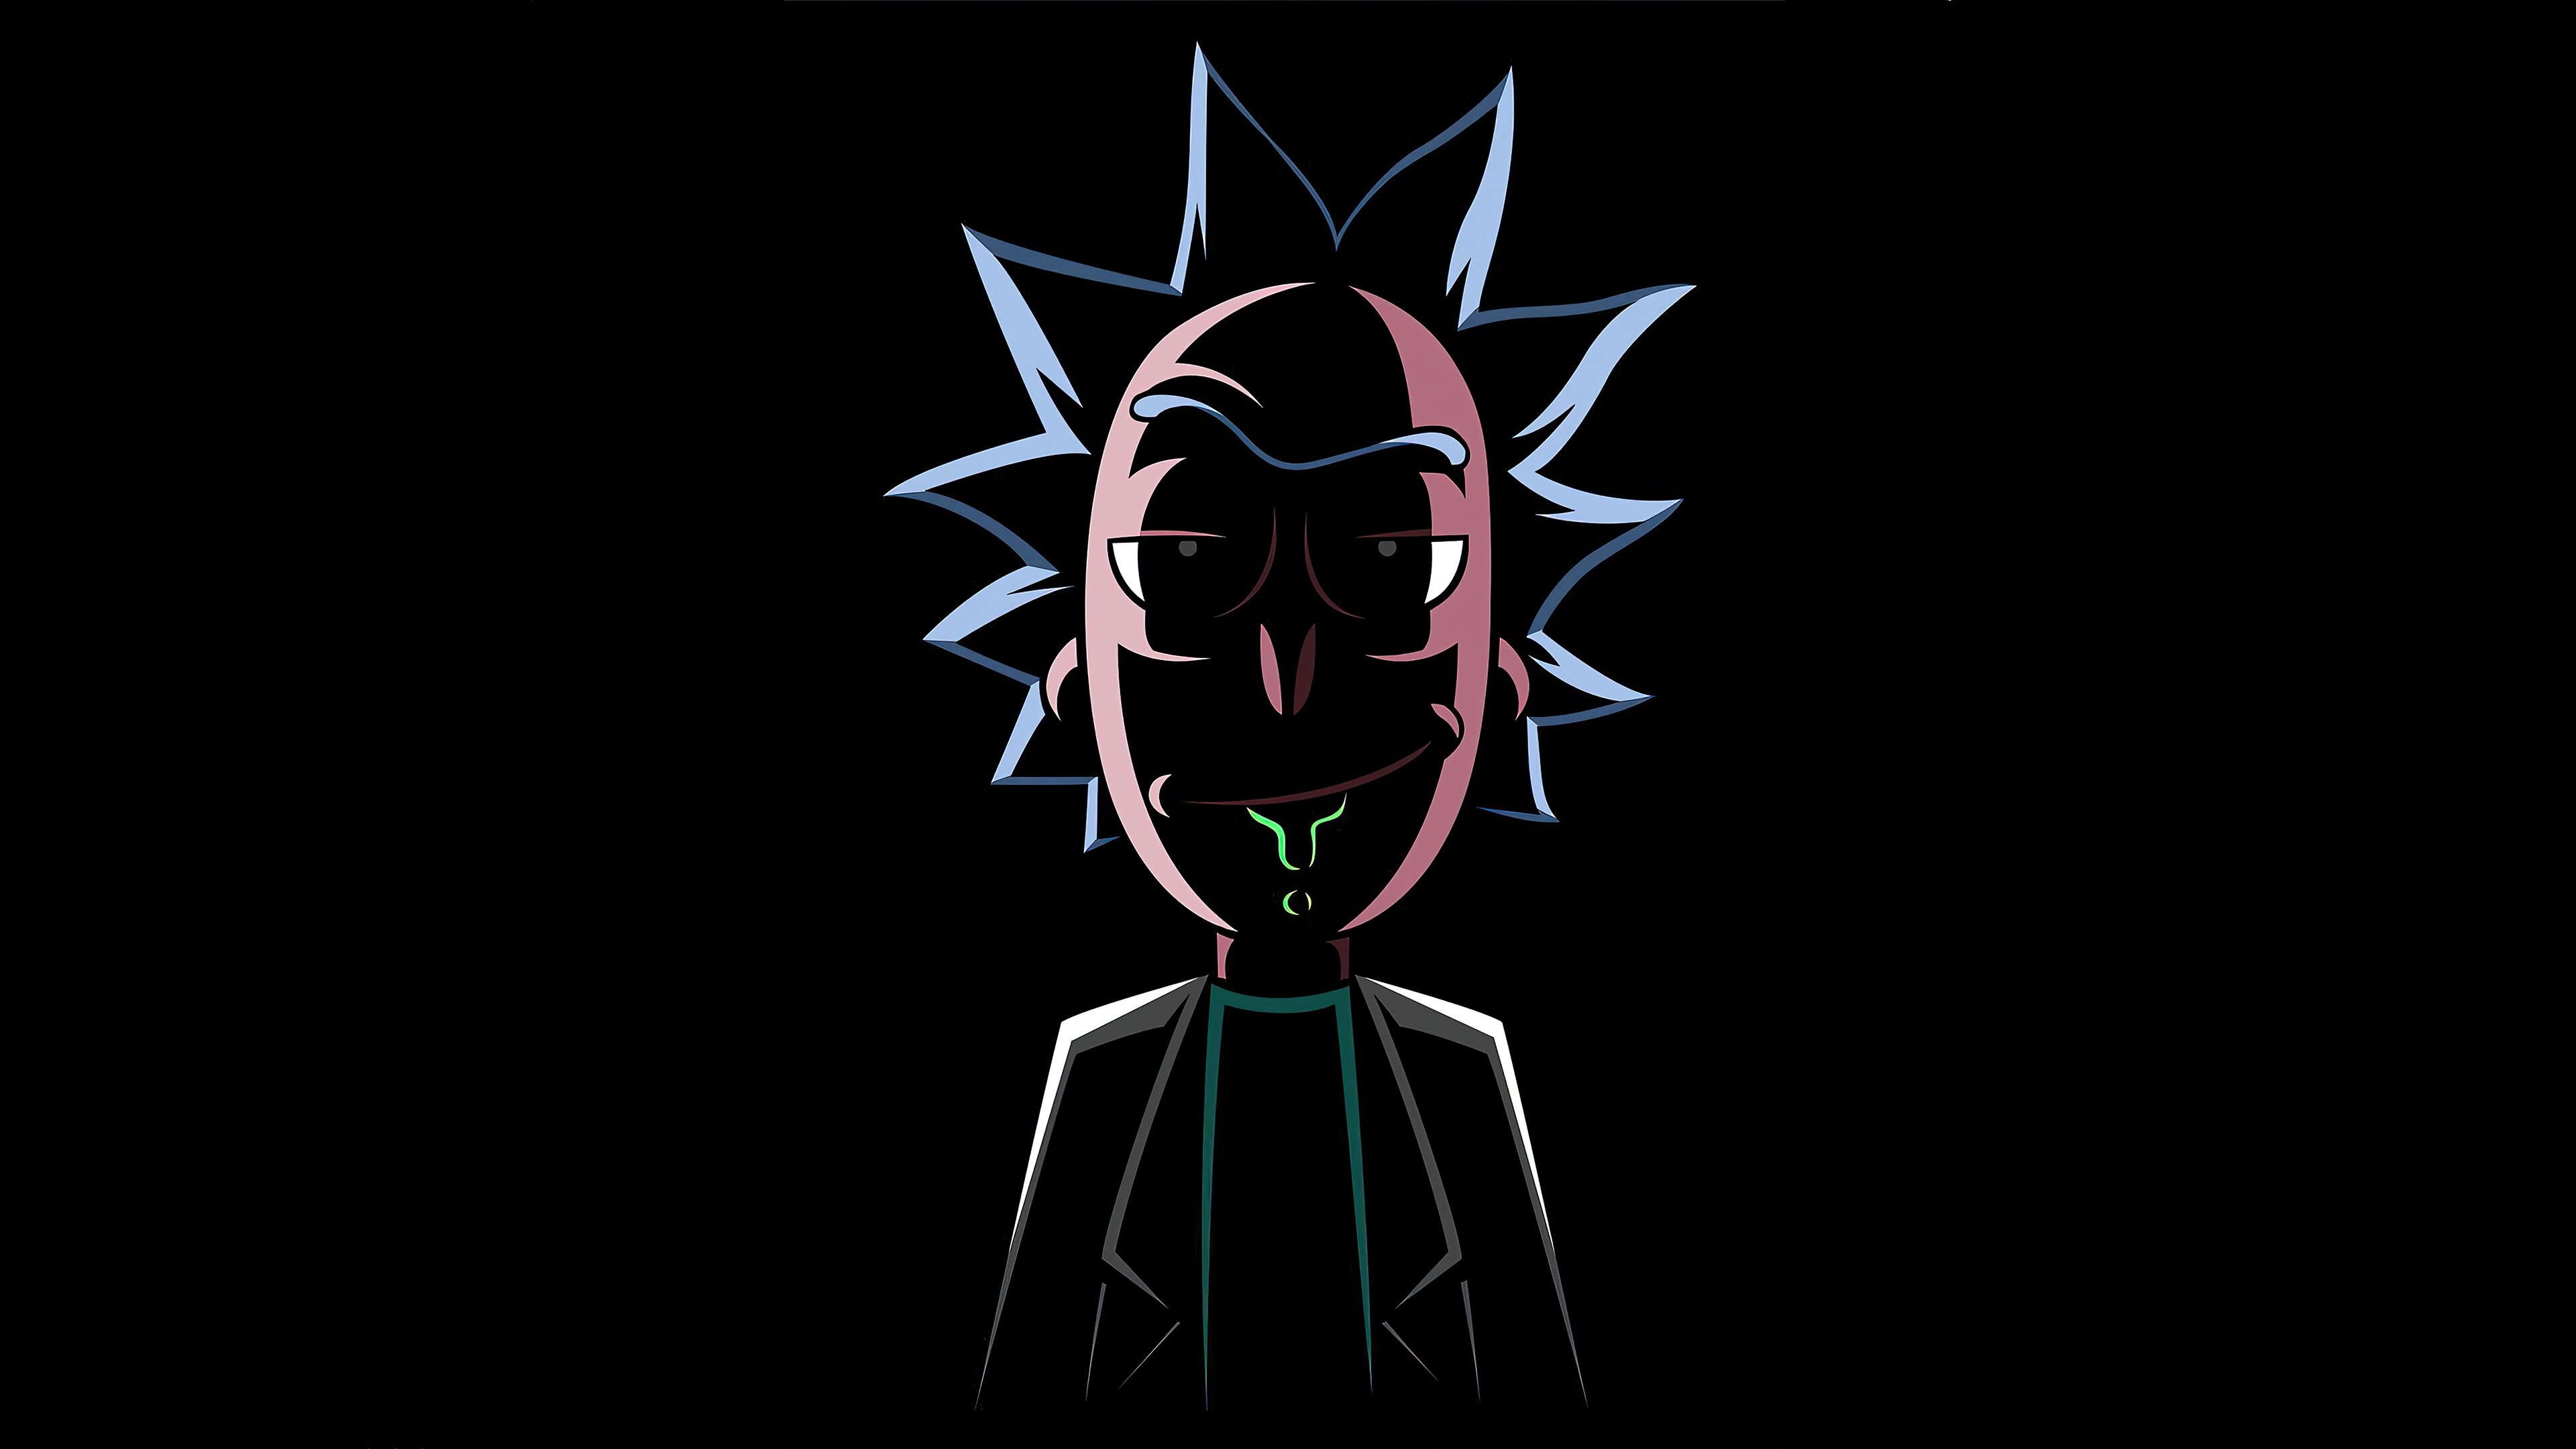 Rick and Morty: Sanchez, One of the two eponymous characters from the Adult Swim animated television series. 3840x2160 4K Wallpaper.